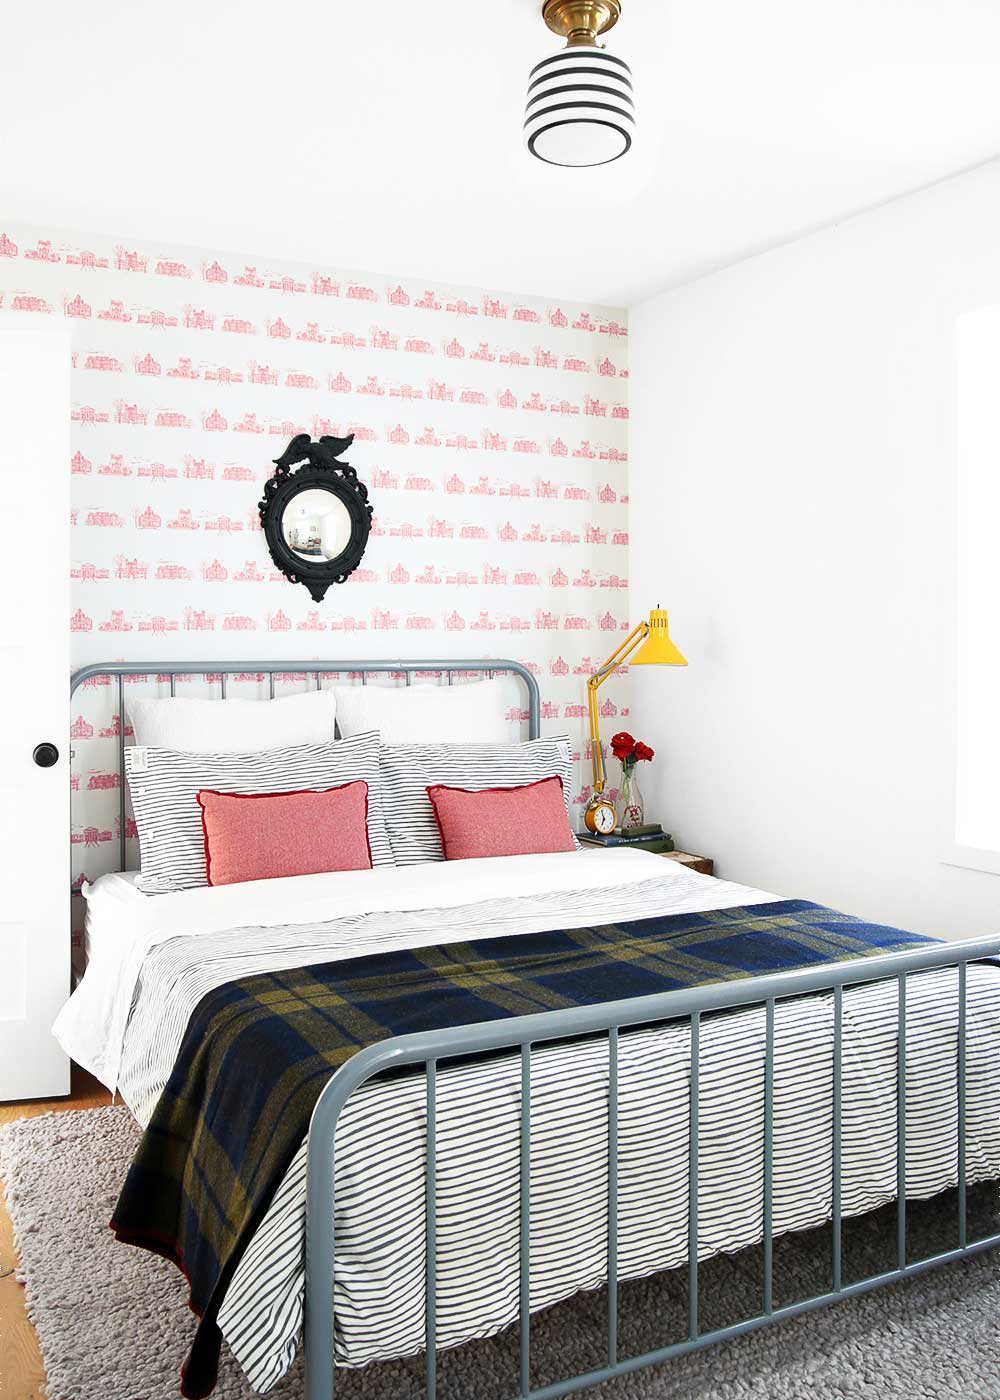 The guest room at The Fauxhouse from The Faux Martha